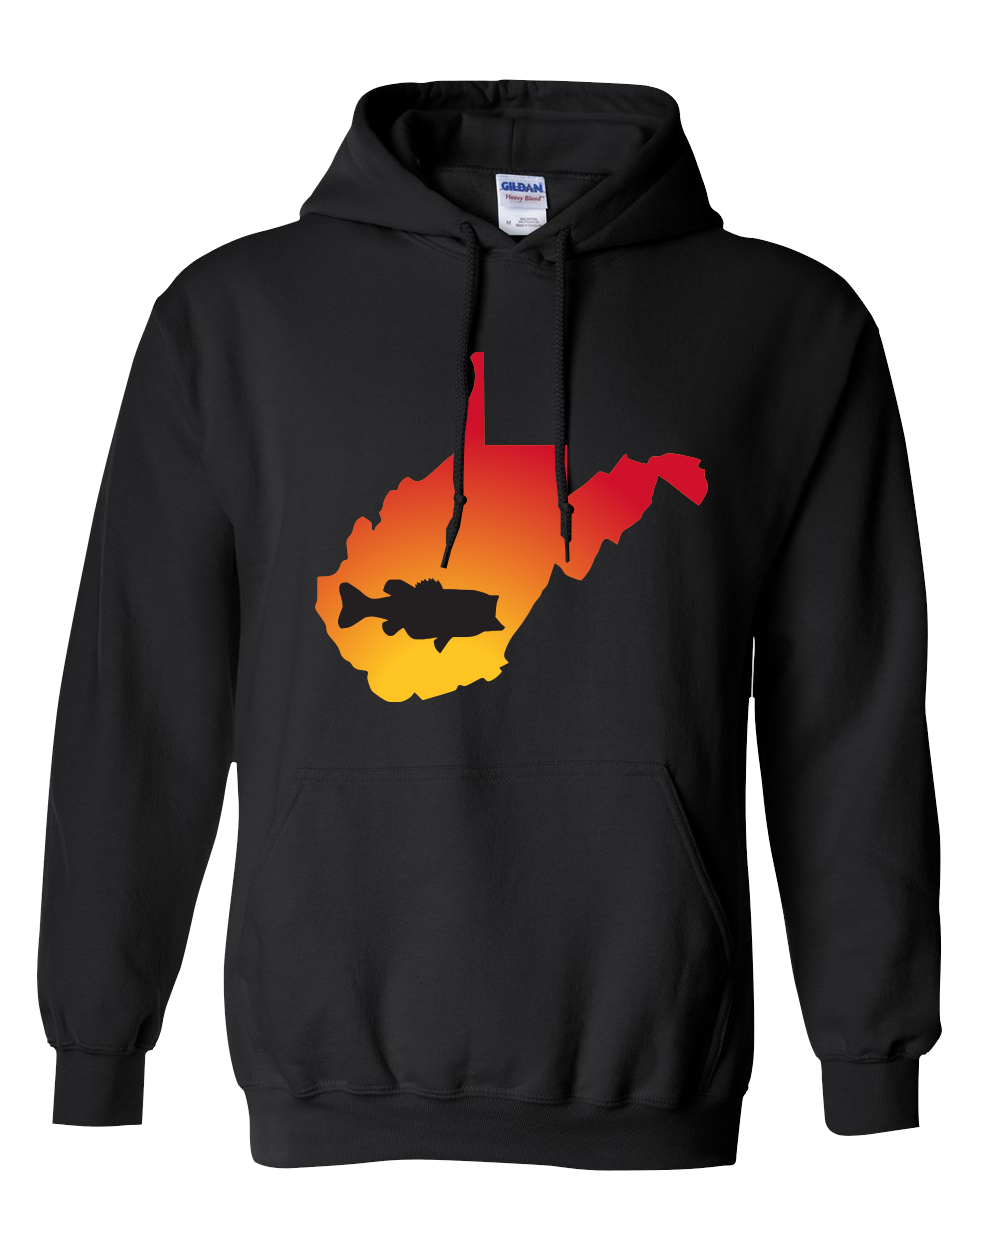 Pullover Hooded Sweatshirt West Virginia Black Large Mouth Bass Vibrant Design High Quality Tight Knit Ring Spun Low Maintenance Cotton Printed With The Newest Available Color Transfer Technology